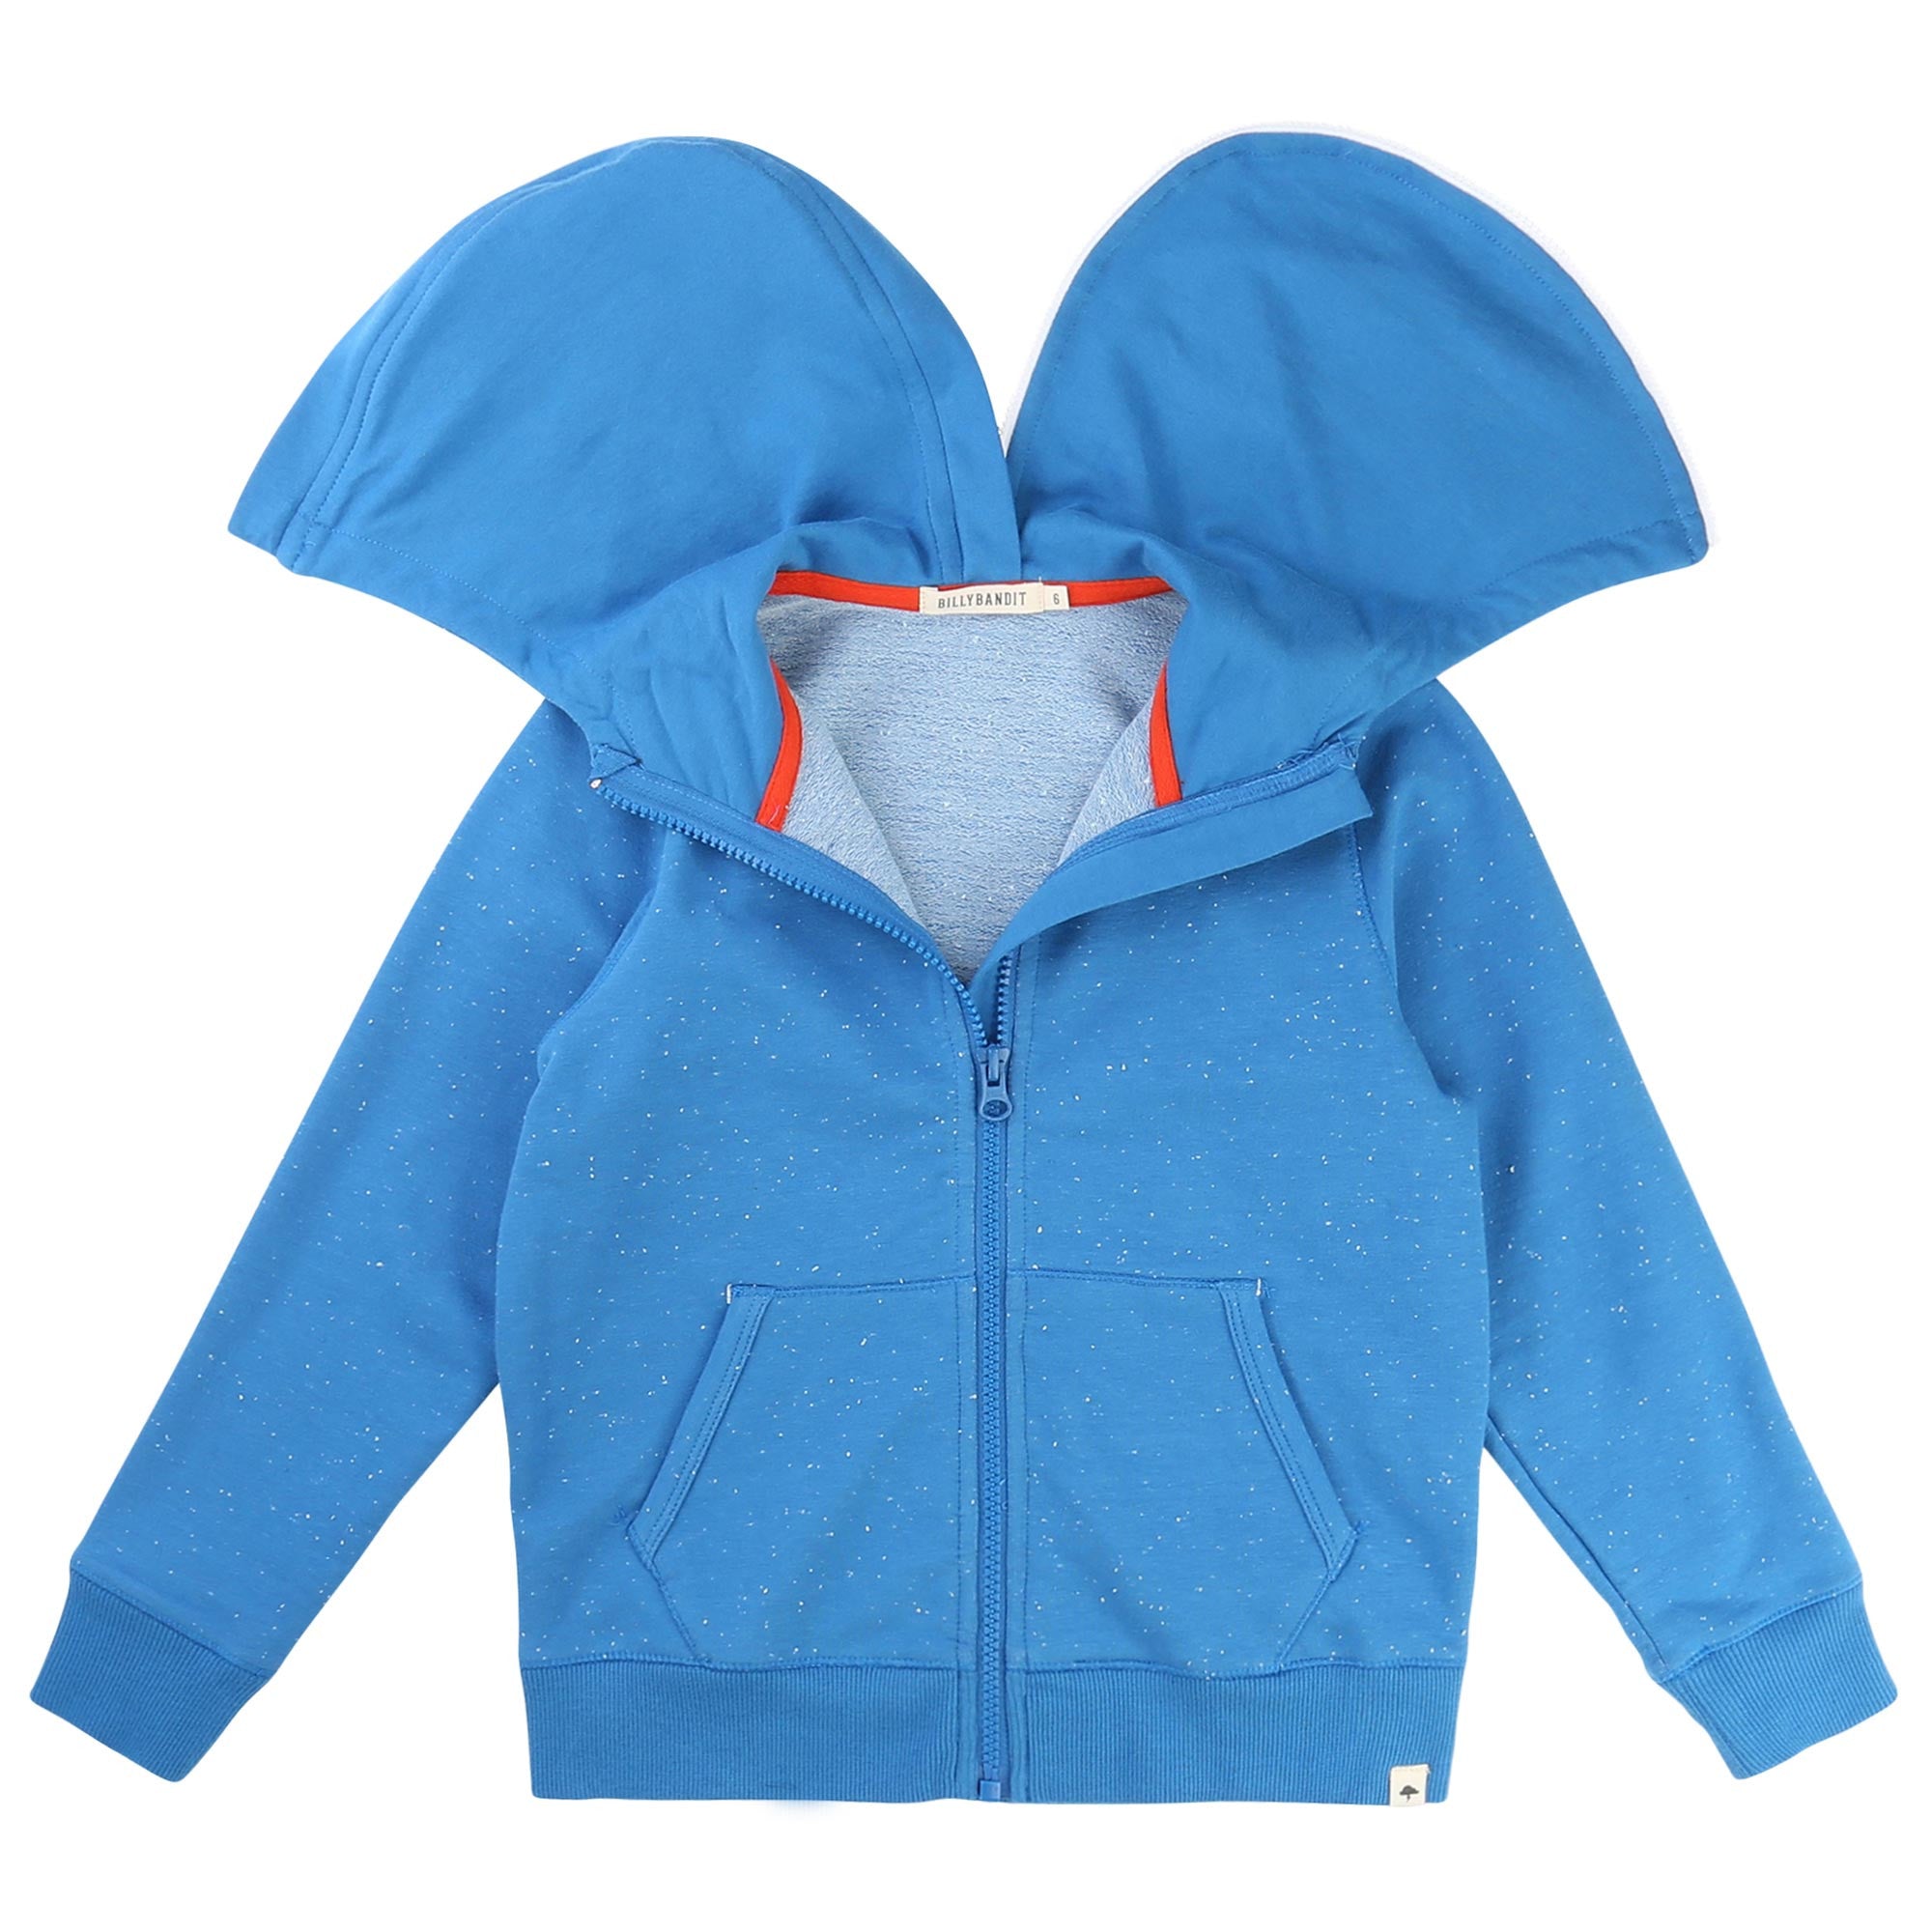 Boys Turquoise Blue Zip-Up Hooded Top